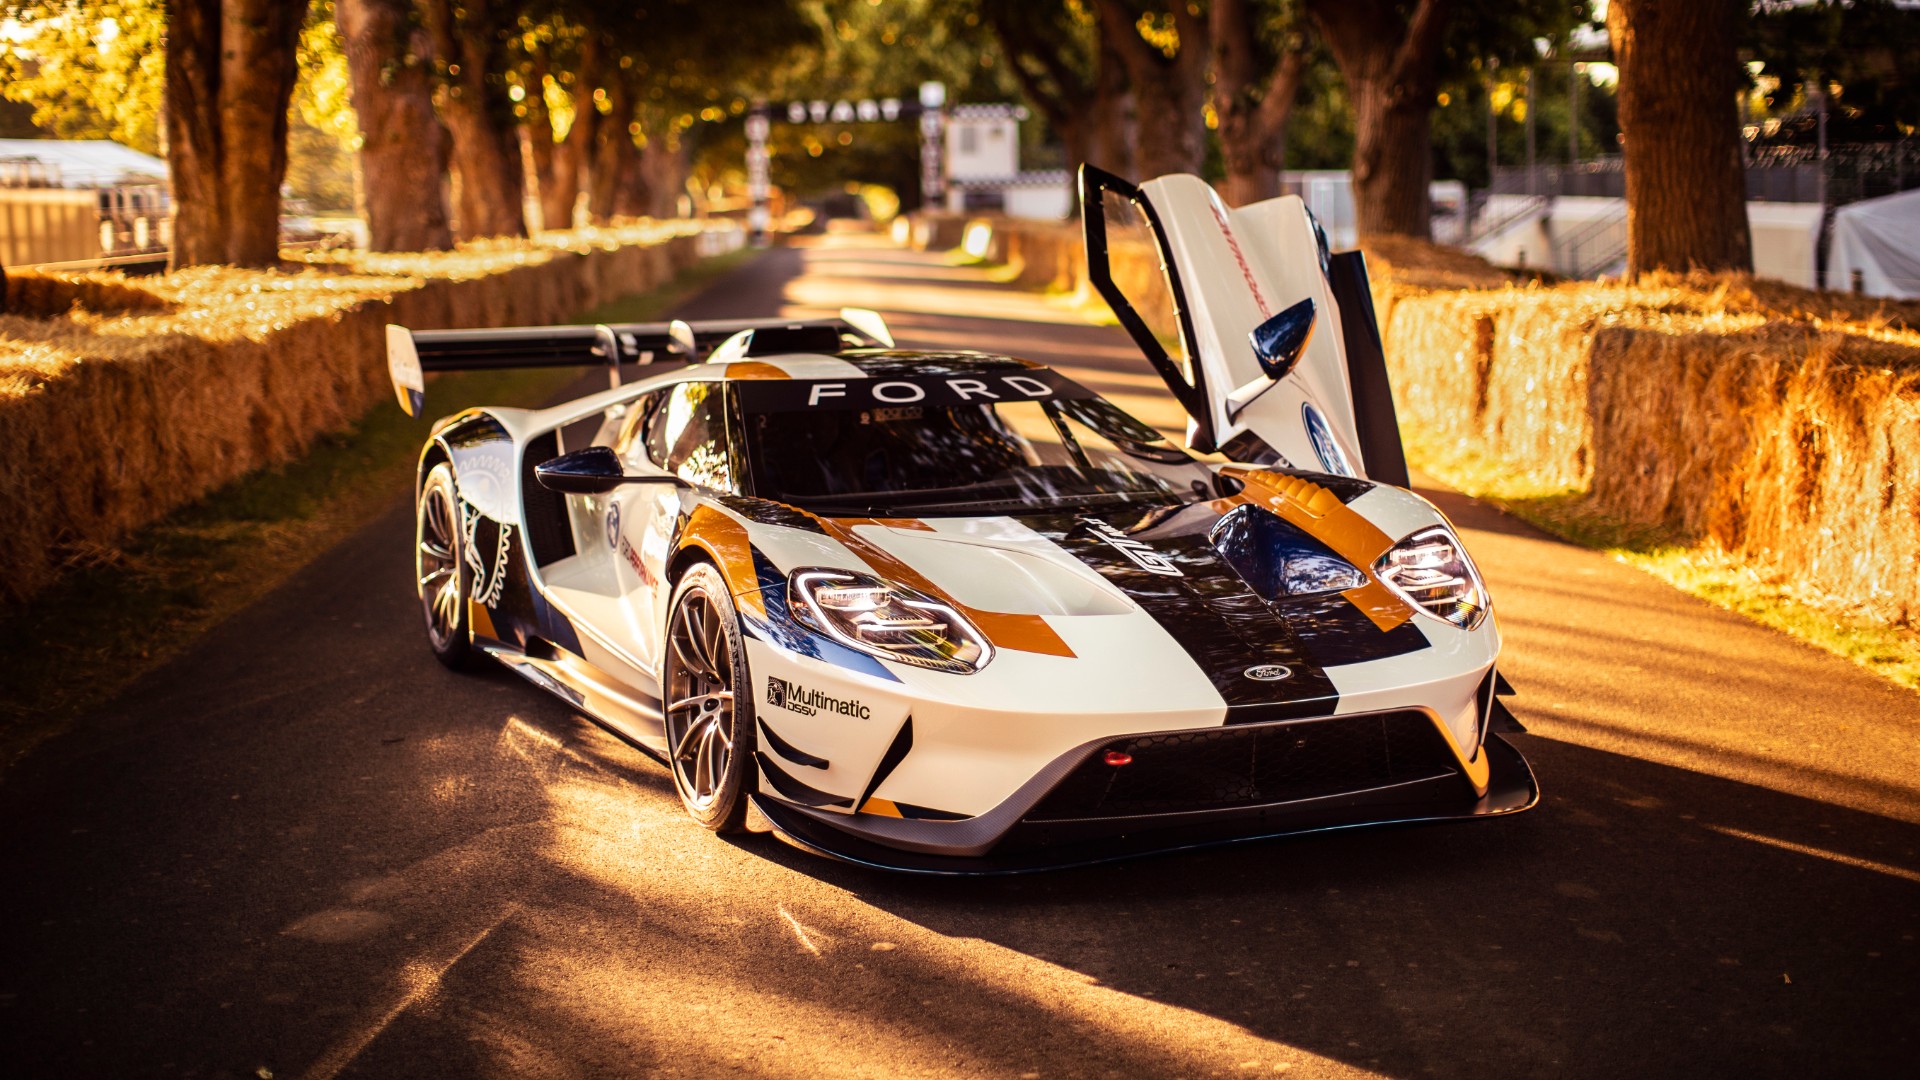 Ford GT MkII track-only supercar at Goodwood